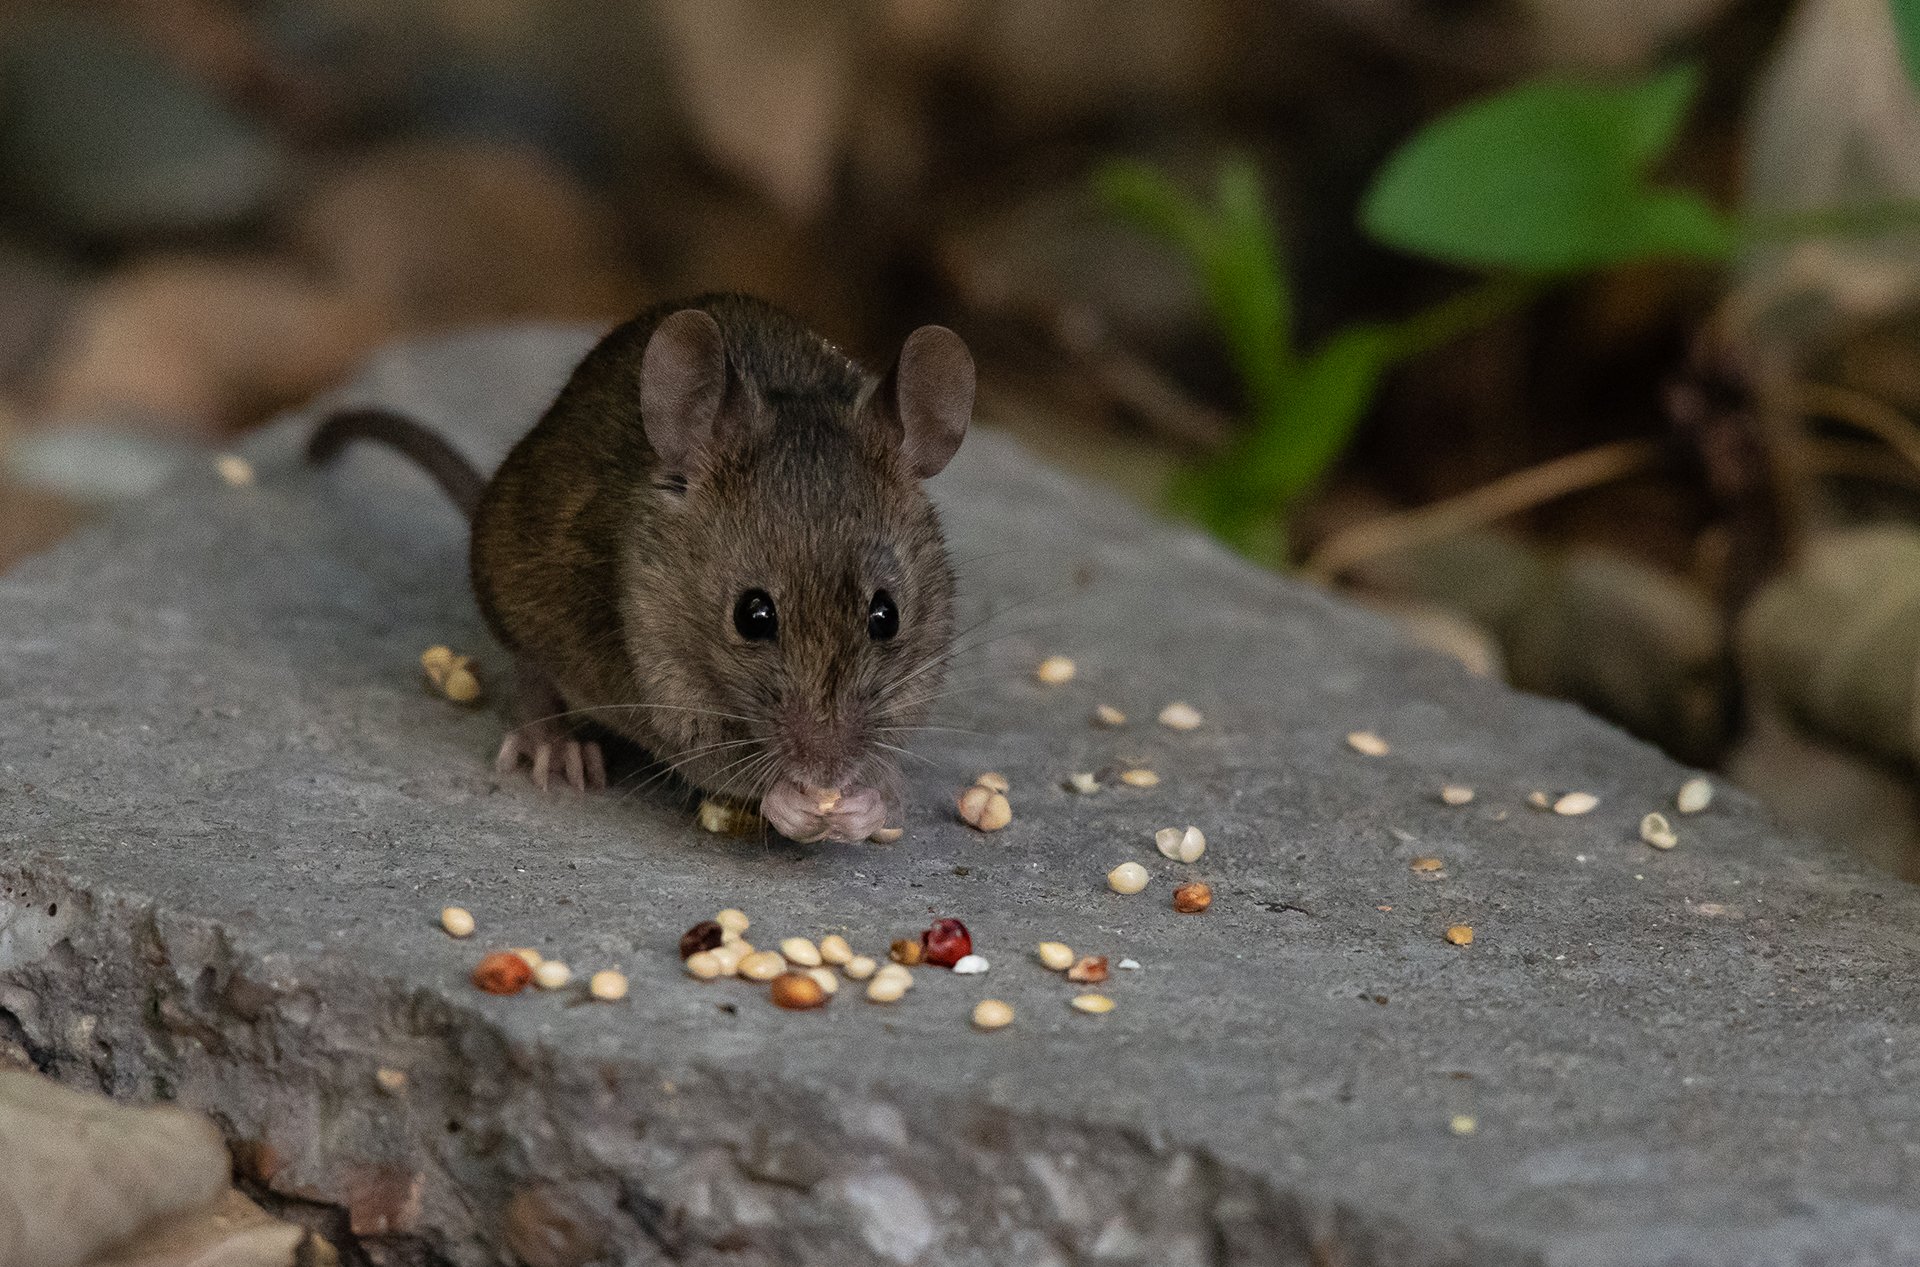 What can I give a wild mouse to eat?